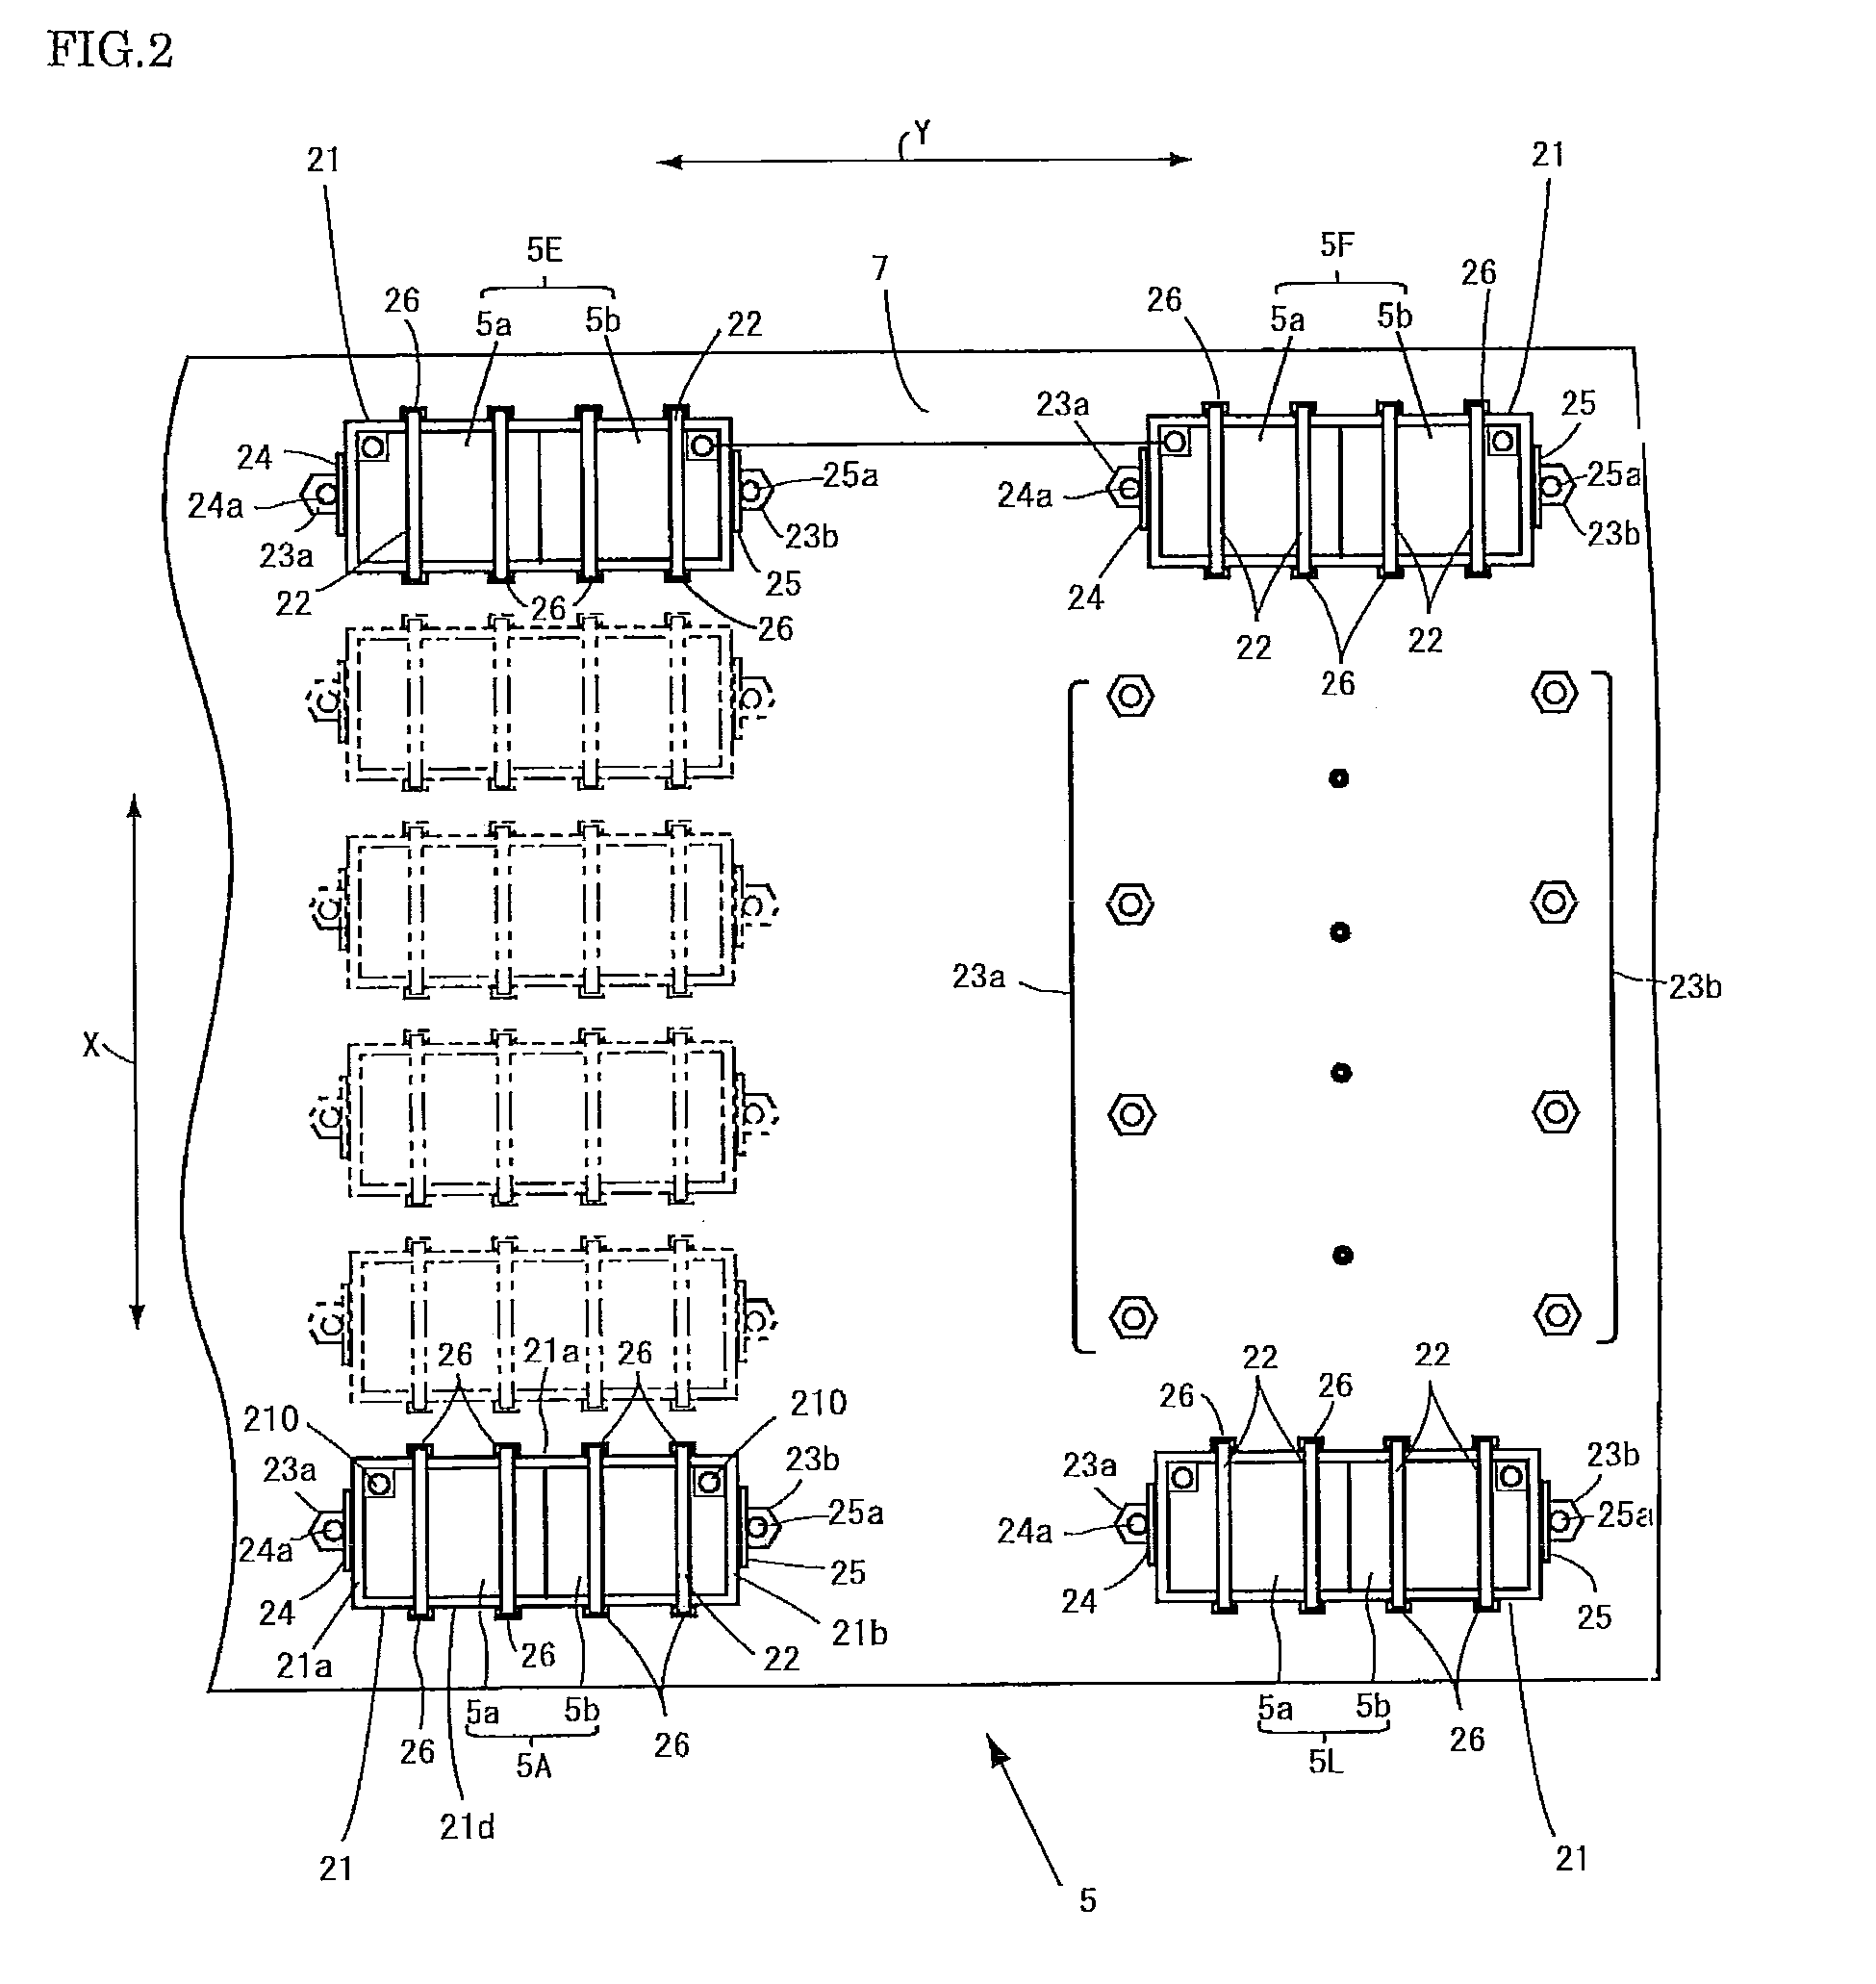 Battery positioning structure for electric vehicle